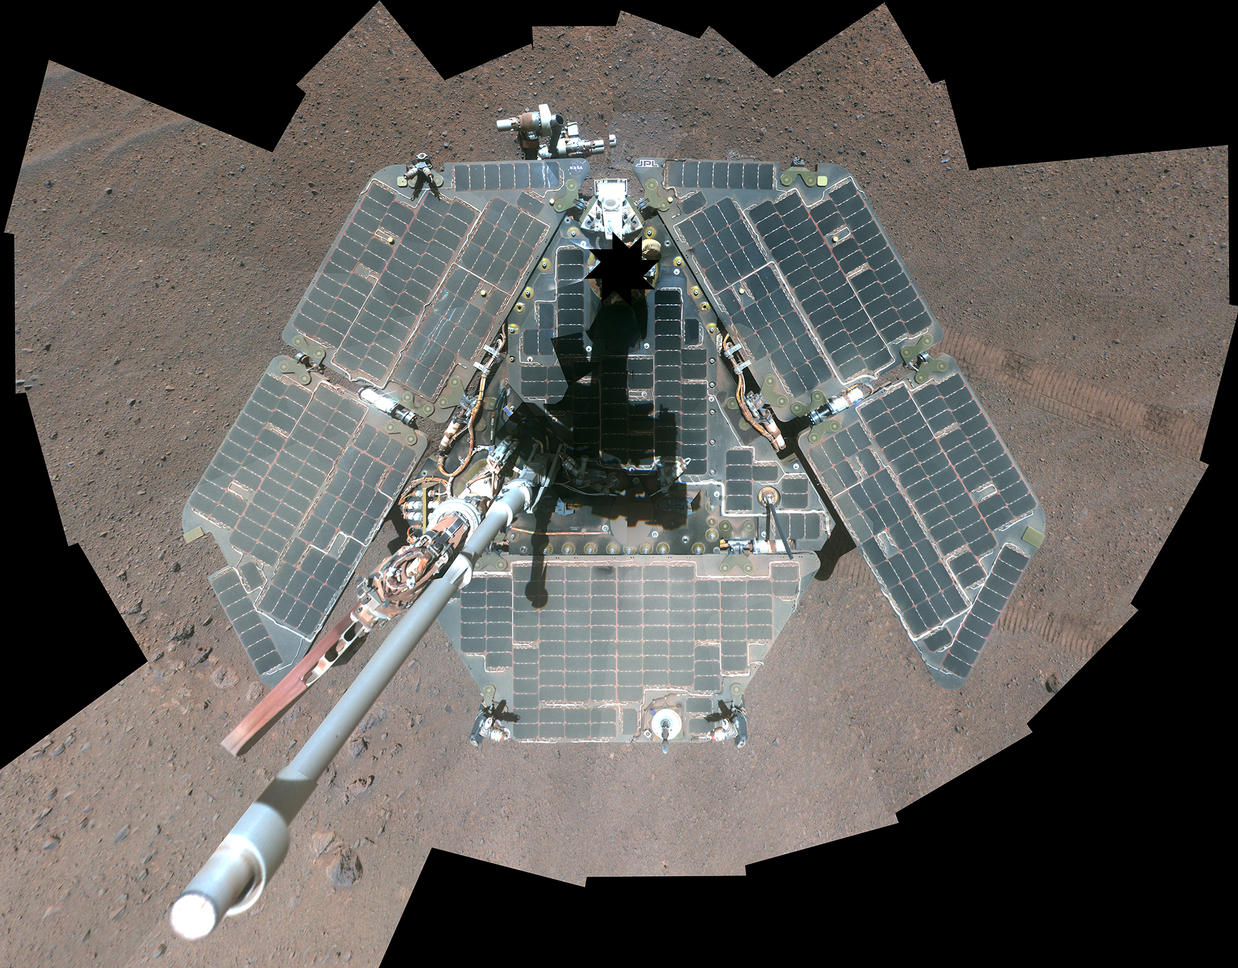 A self-portrait from overhead shows a view of the rover solar panels, which appear grayish-green and wiped clean of dust.